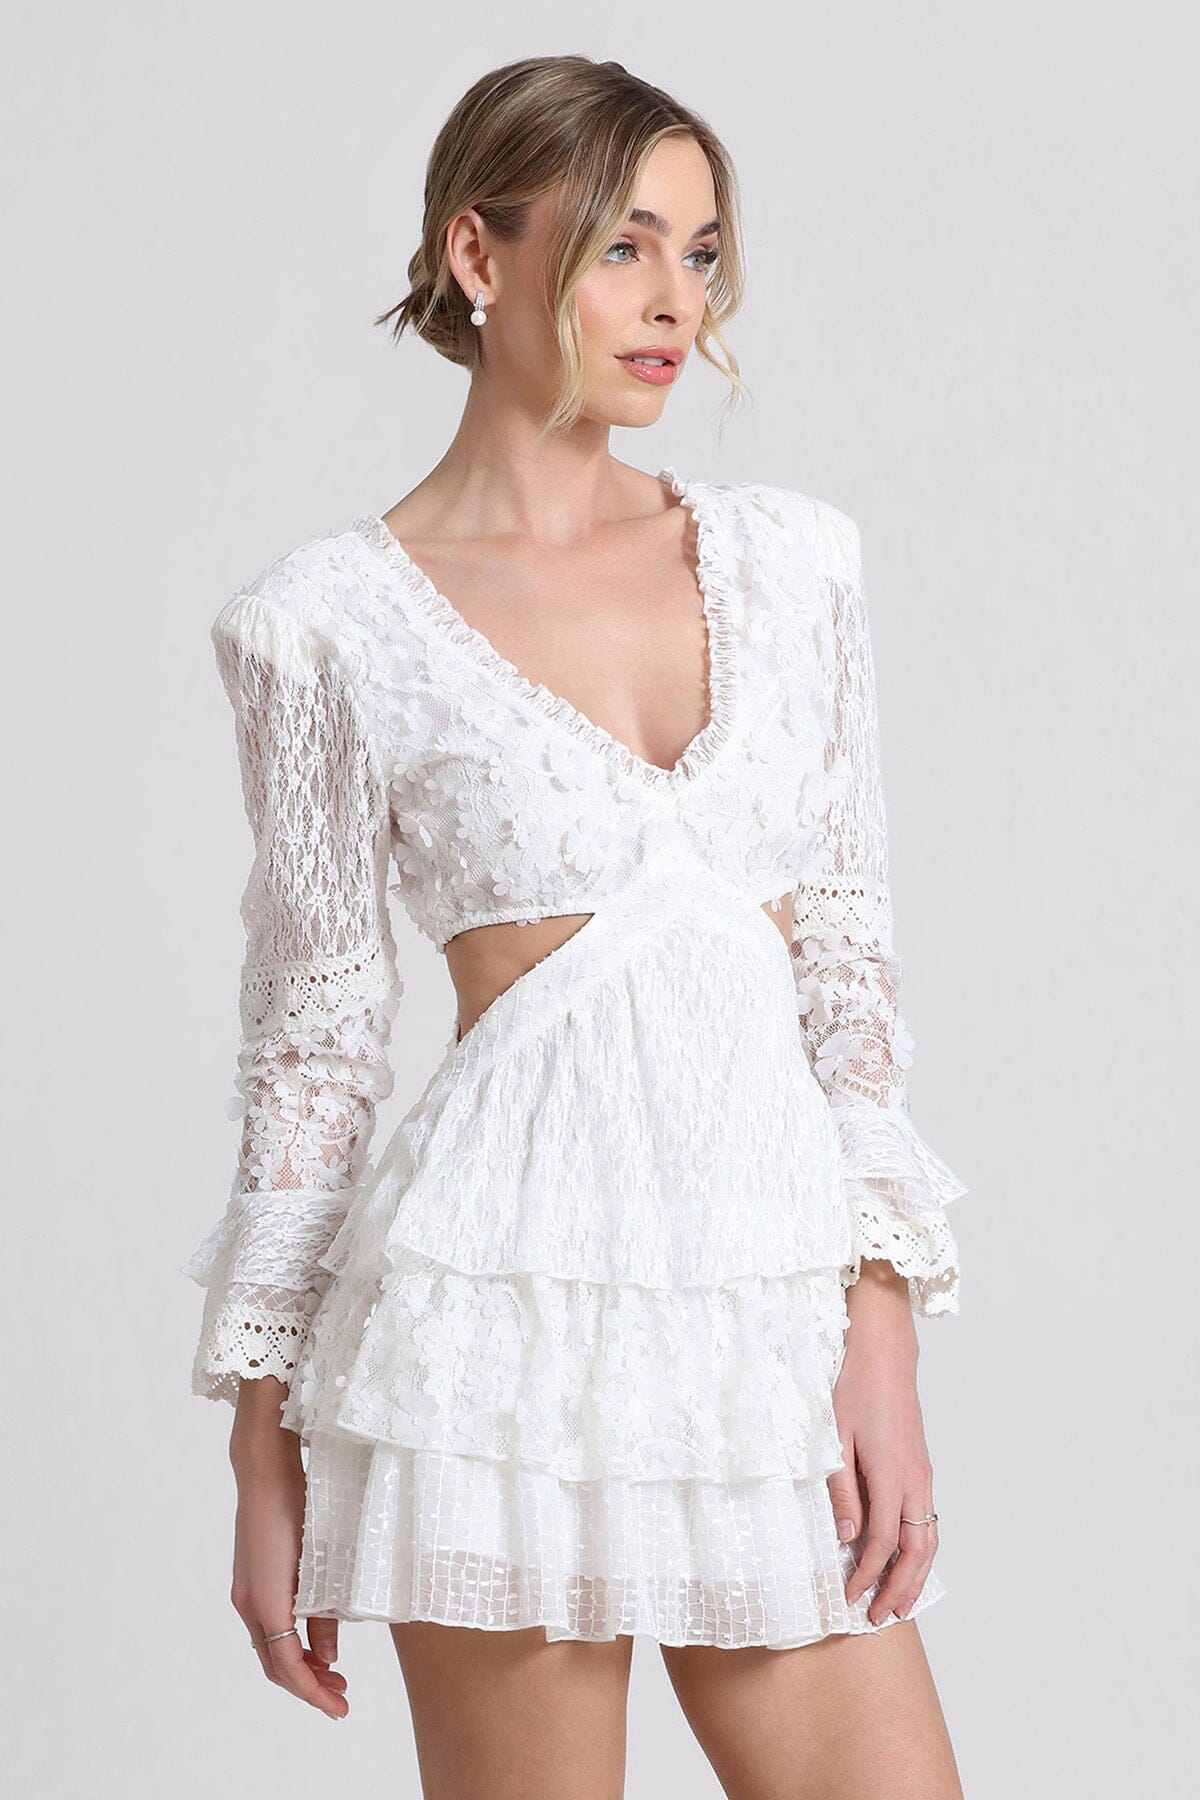 All white lace cut-out tiered mini dress - women's figure flattering summer party dresses by Avec Les Filles